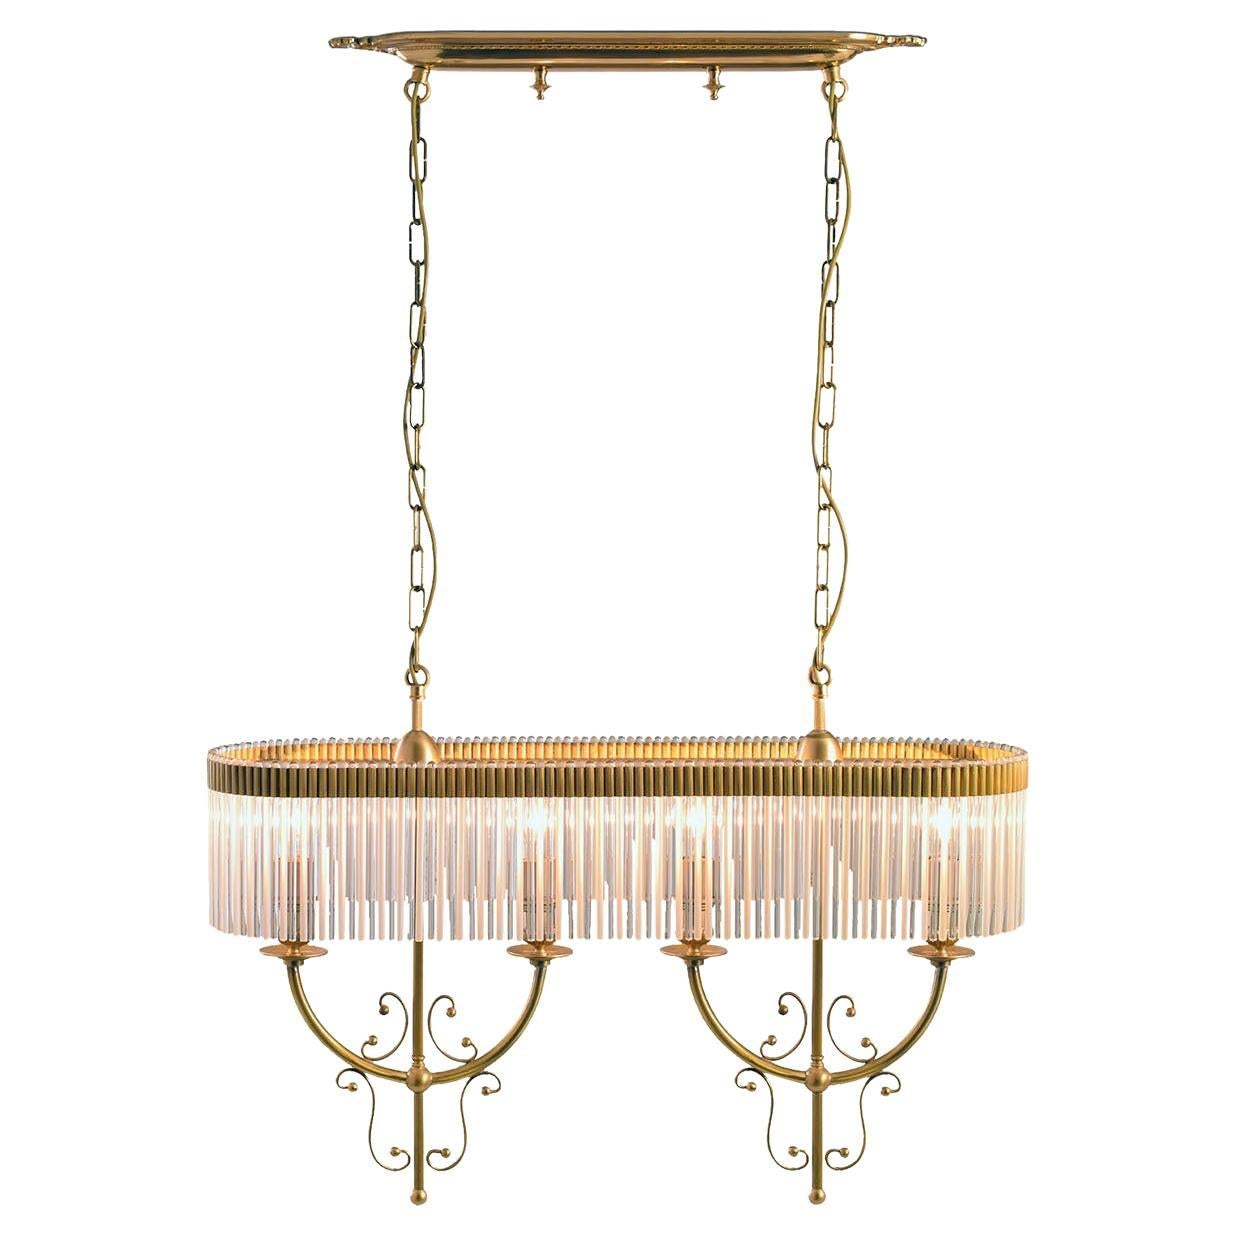 Seicento 4-Light Chandelier by Luca Bussacchini